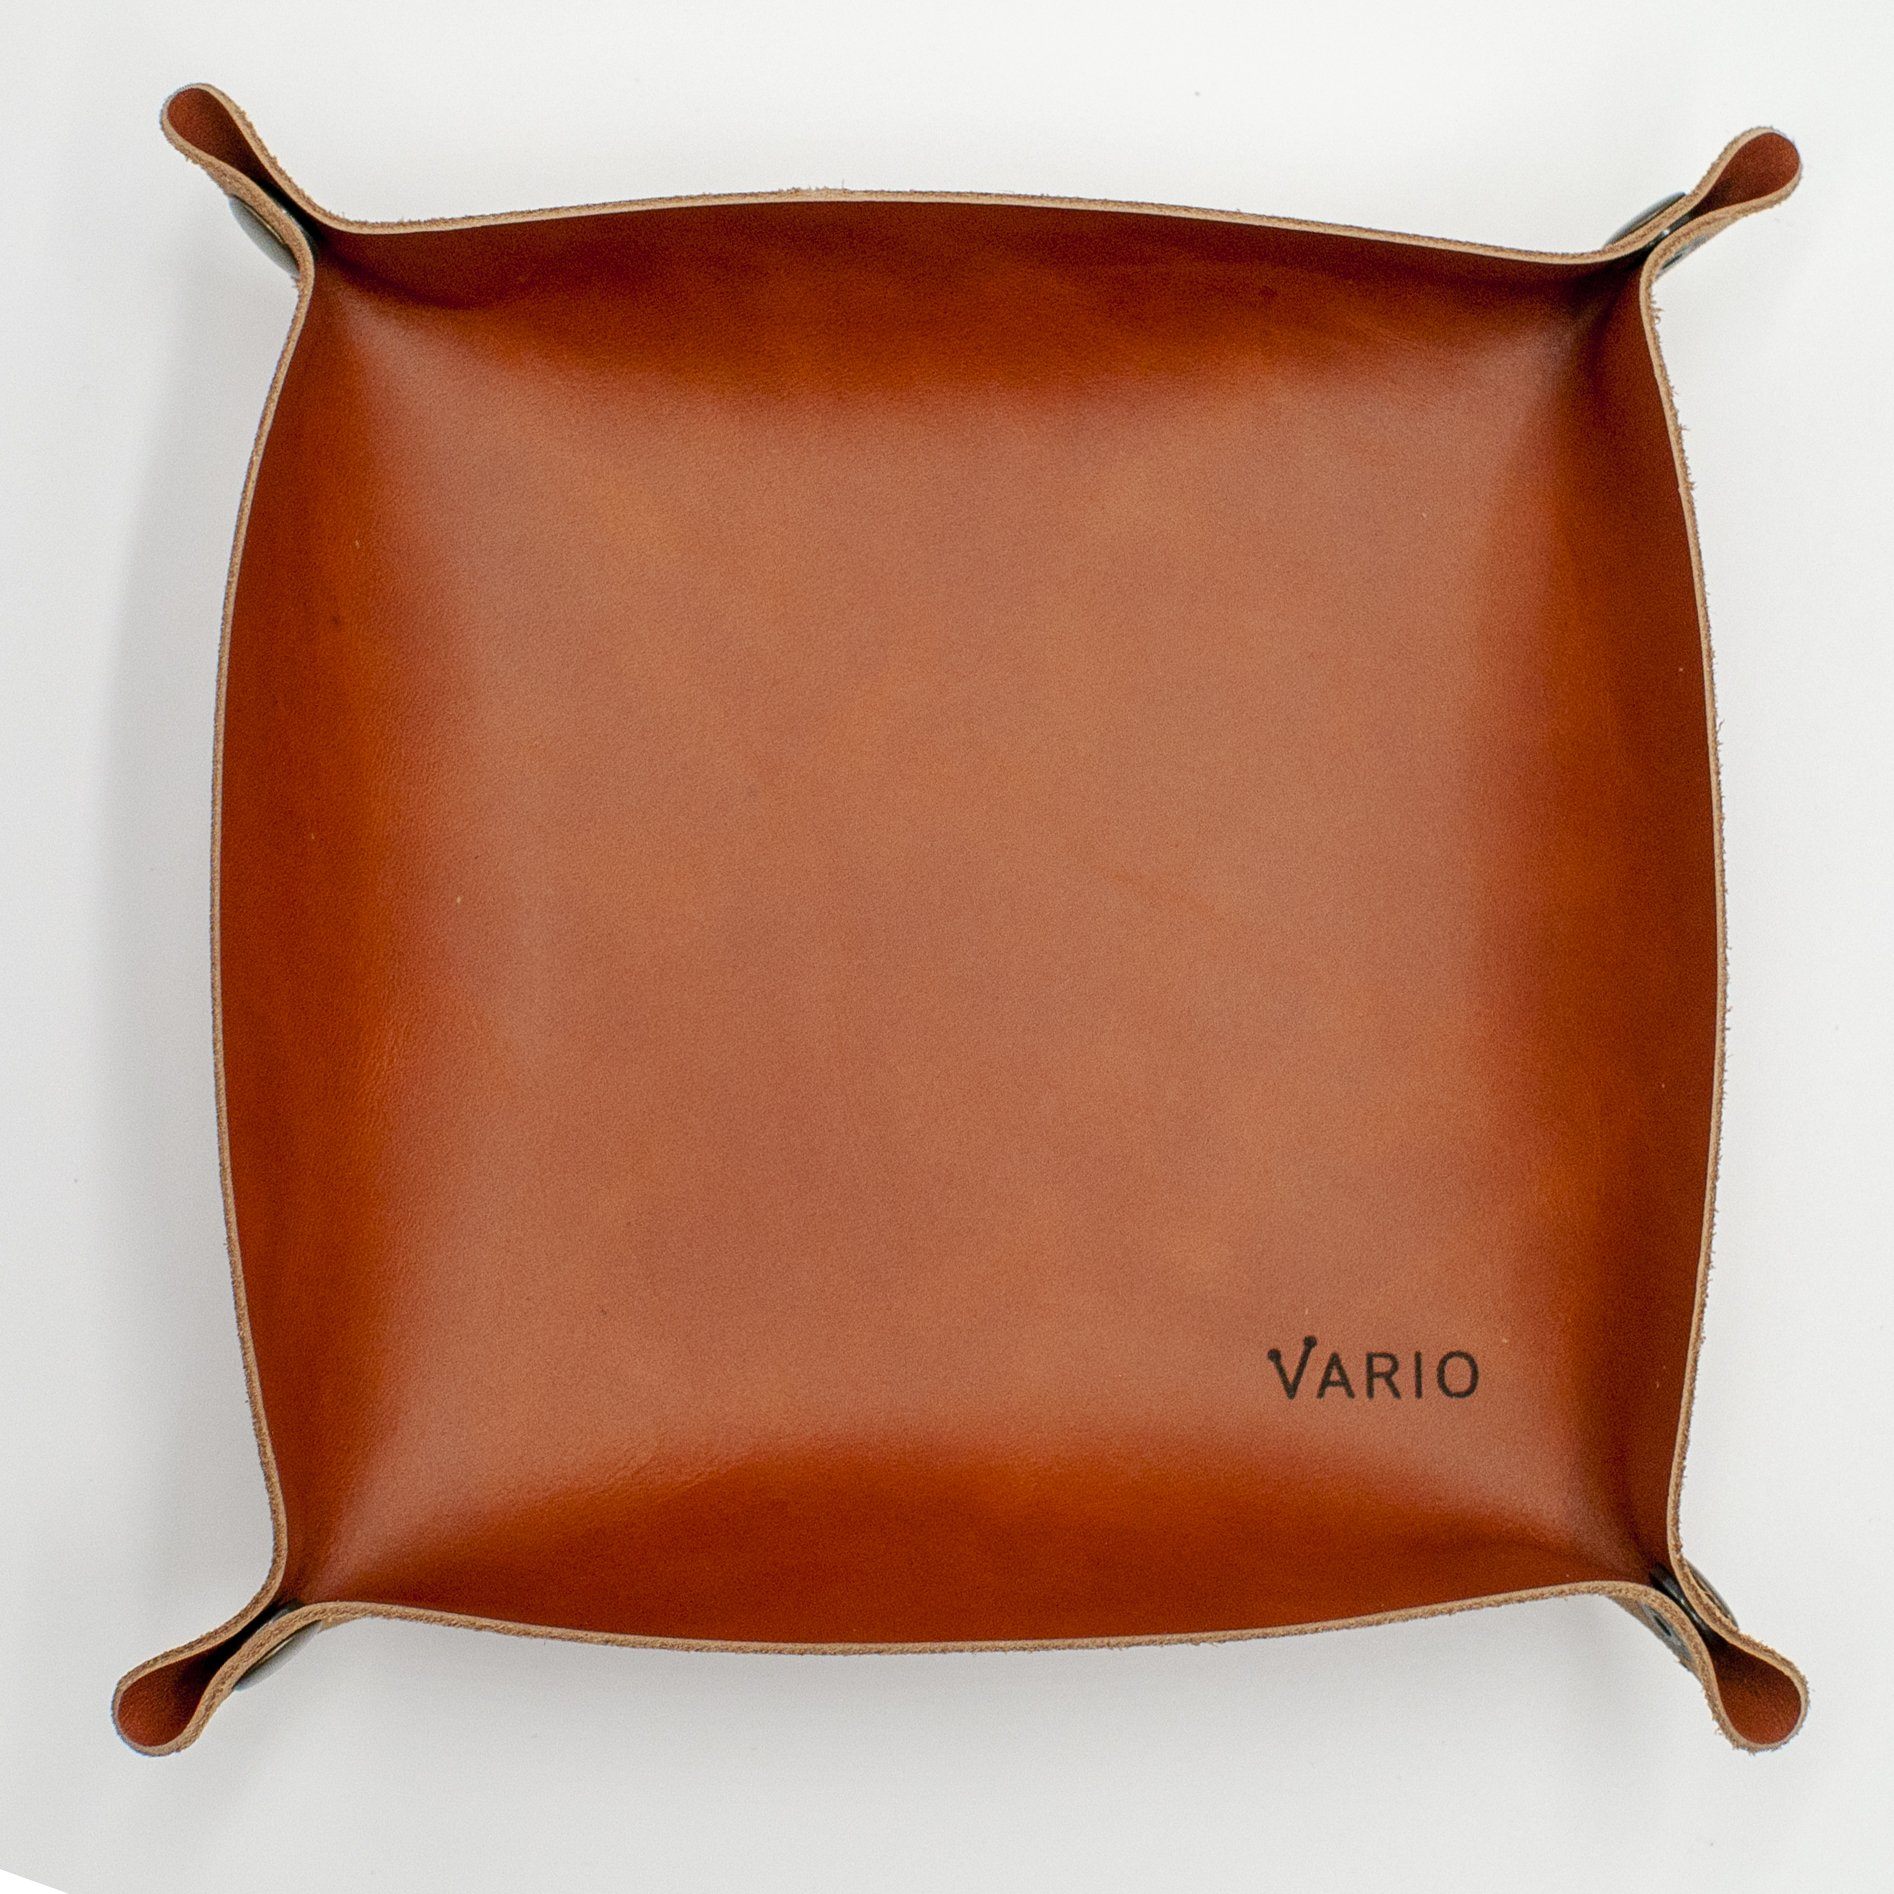 Belarusian Caramel Brown Leather Valet Tray for Watch, Keys, Accessories